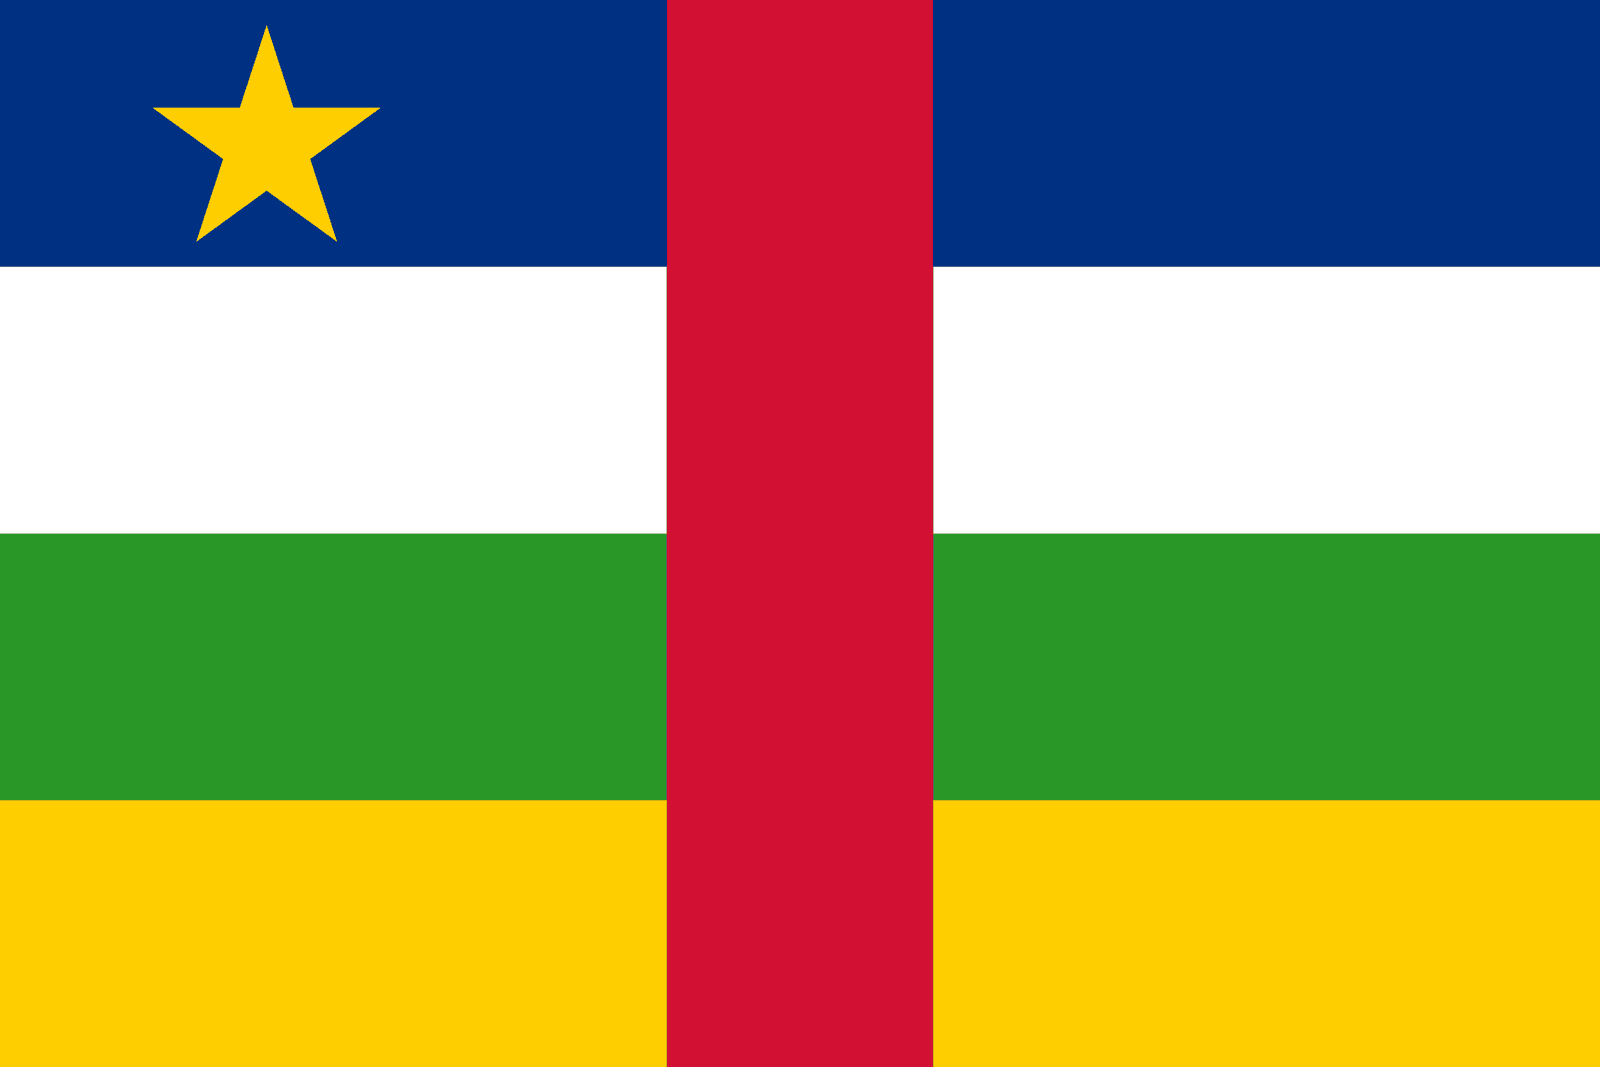 Central African Republic - Powered by Eduhyme.com